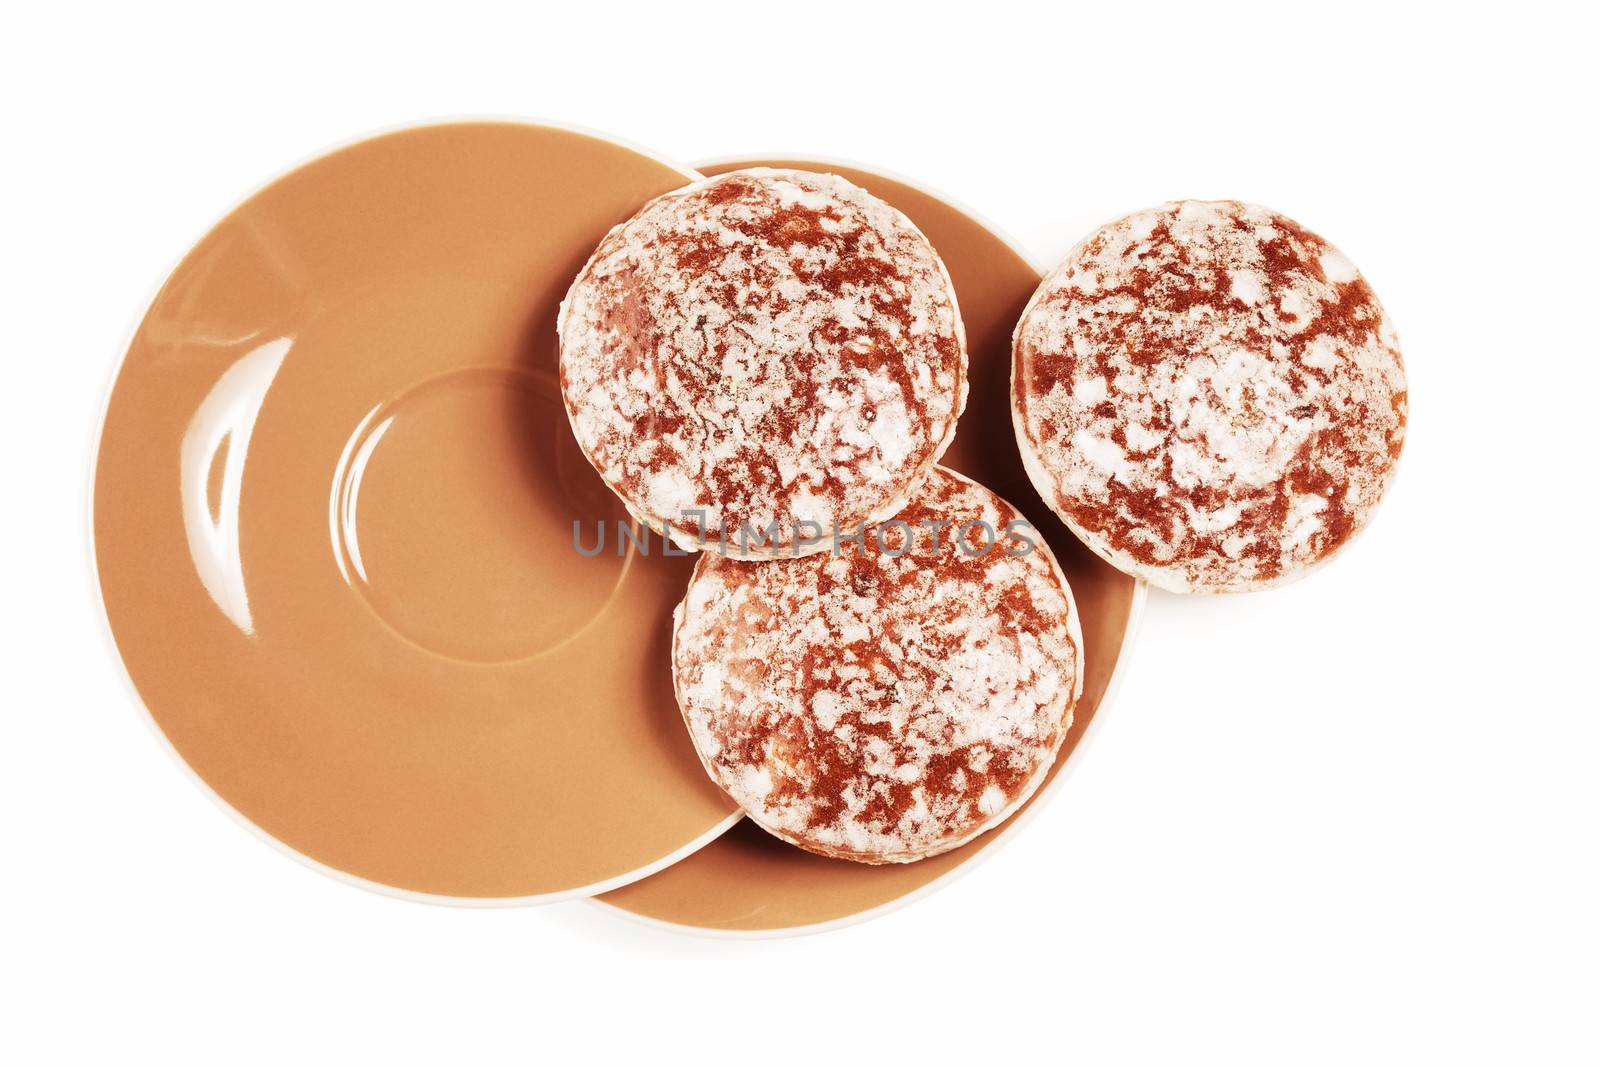 round traditional german christmas lebkuchen gingerbread cookies from top with small brown plates on white background